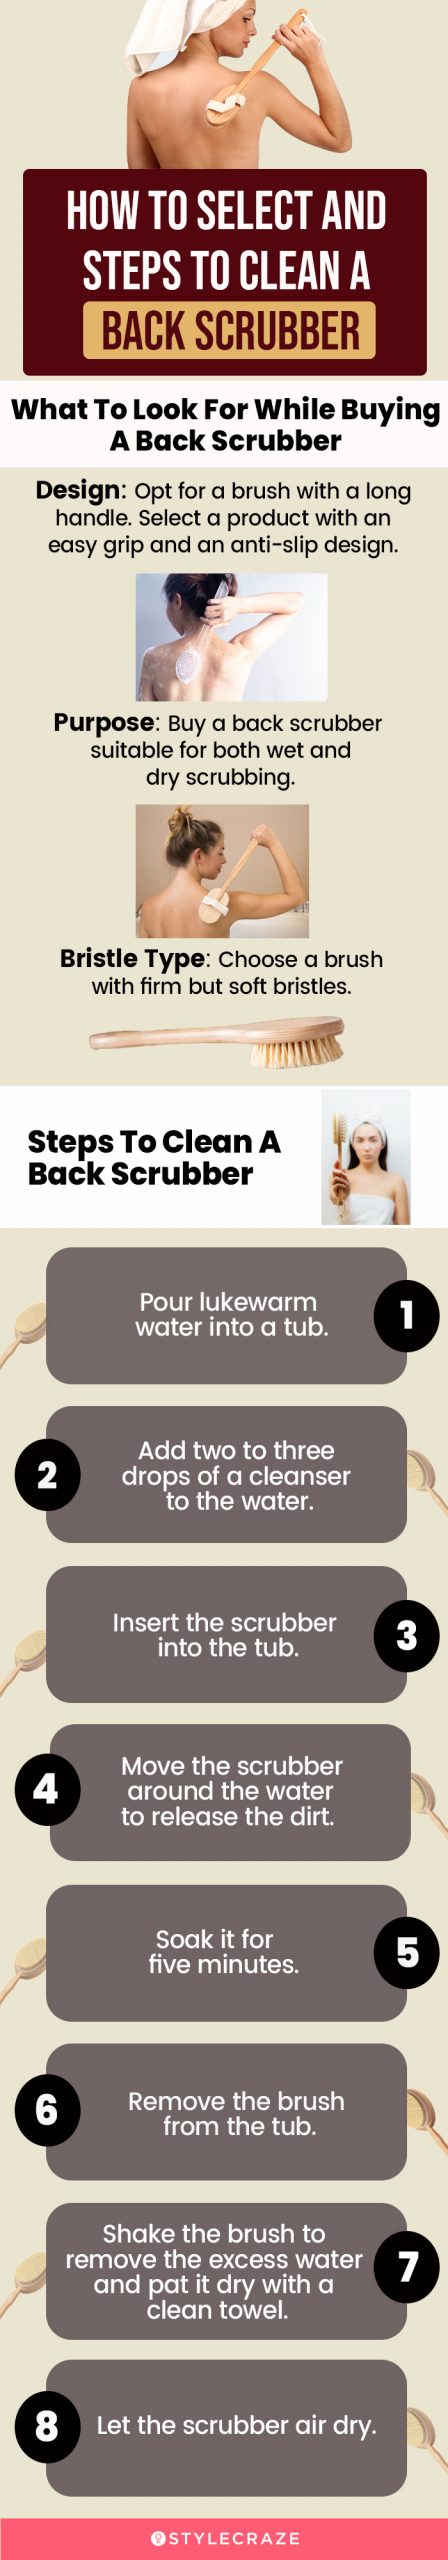 How To Select And Steps To Clean A Back Scrubber